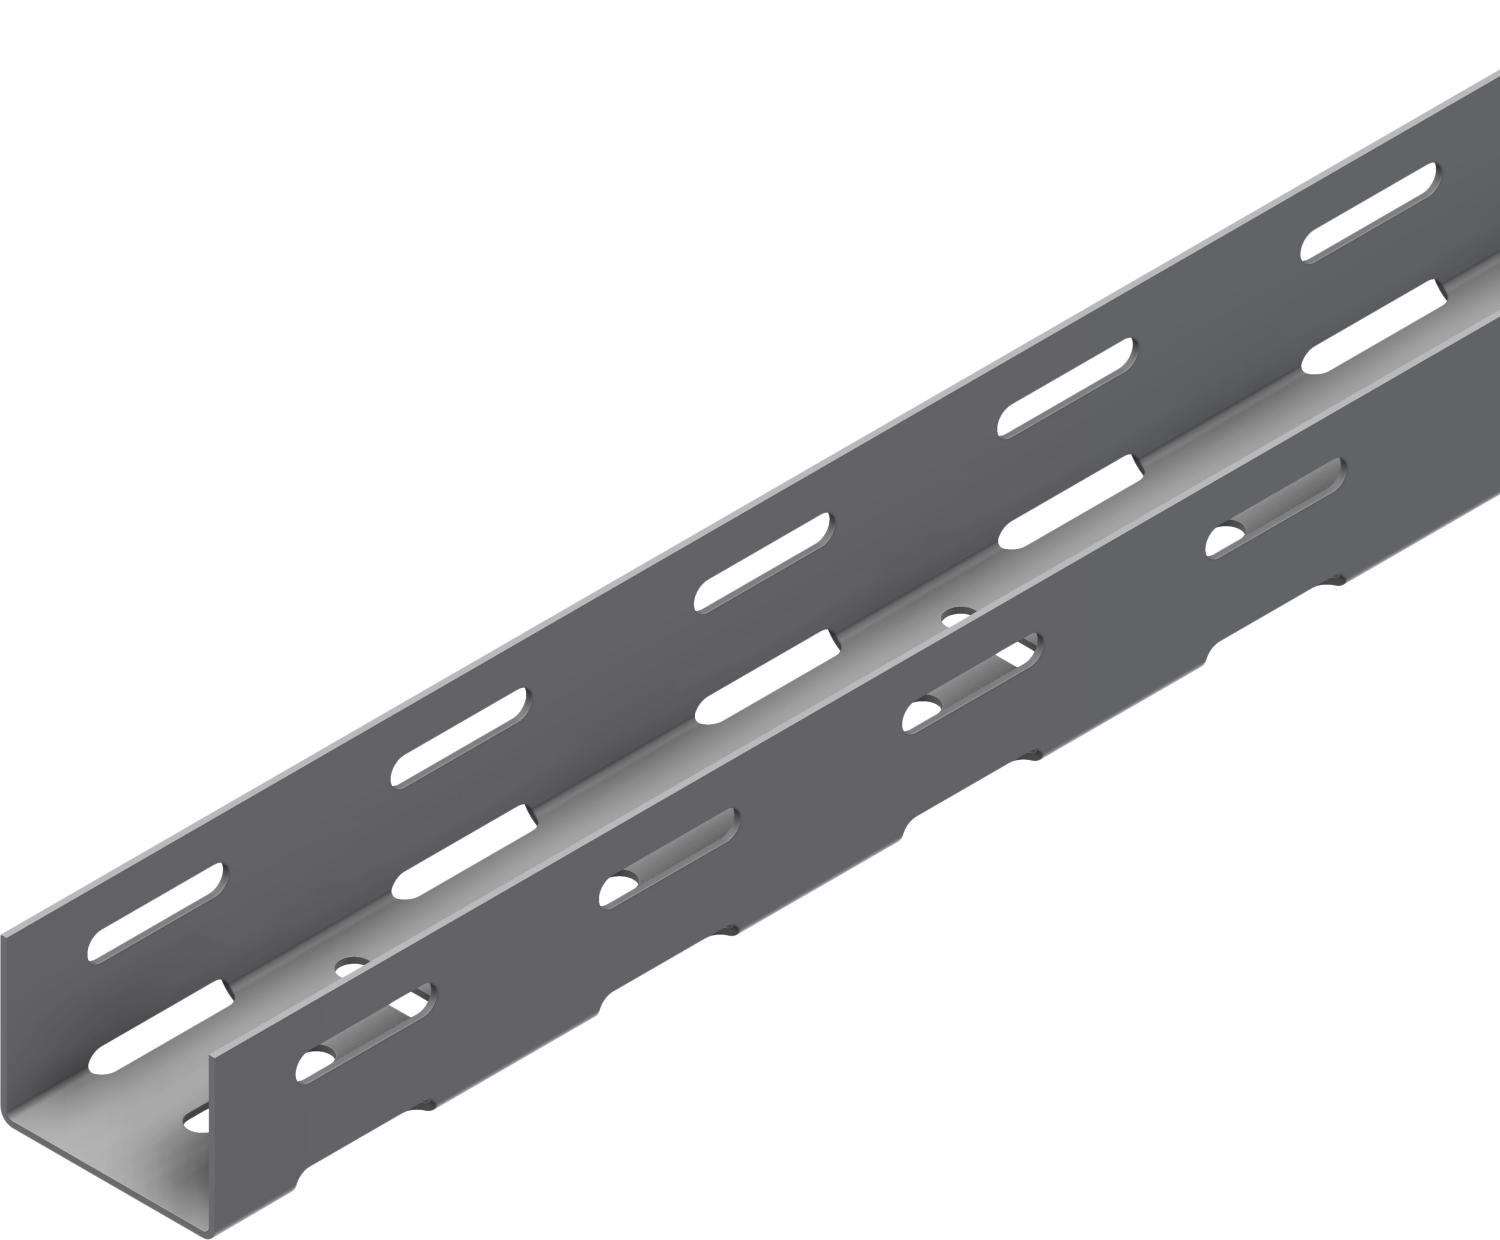 Cable tray SPBE40 CT-50-3000-1.5 SS - Øglænd system